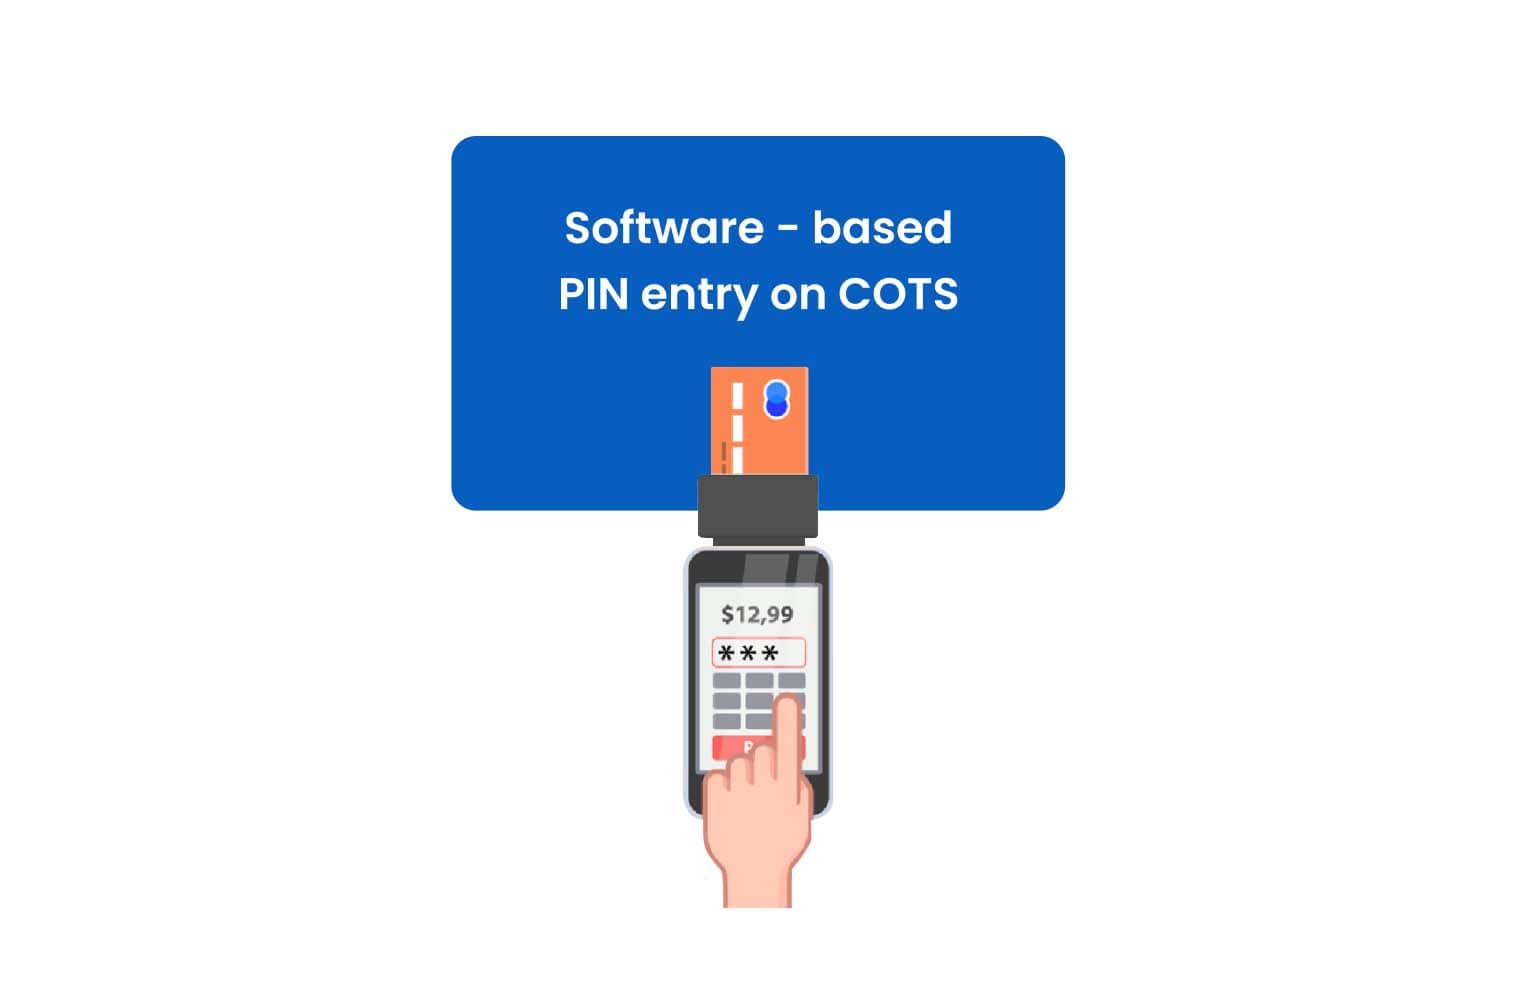 Software-based PIN Entry on COTS